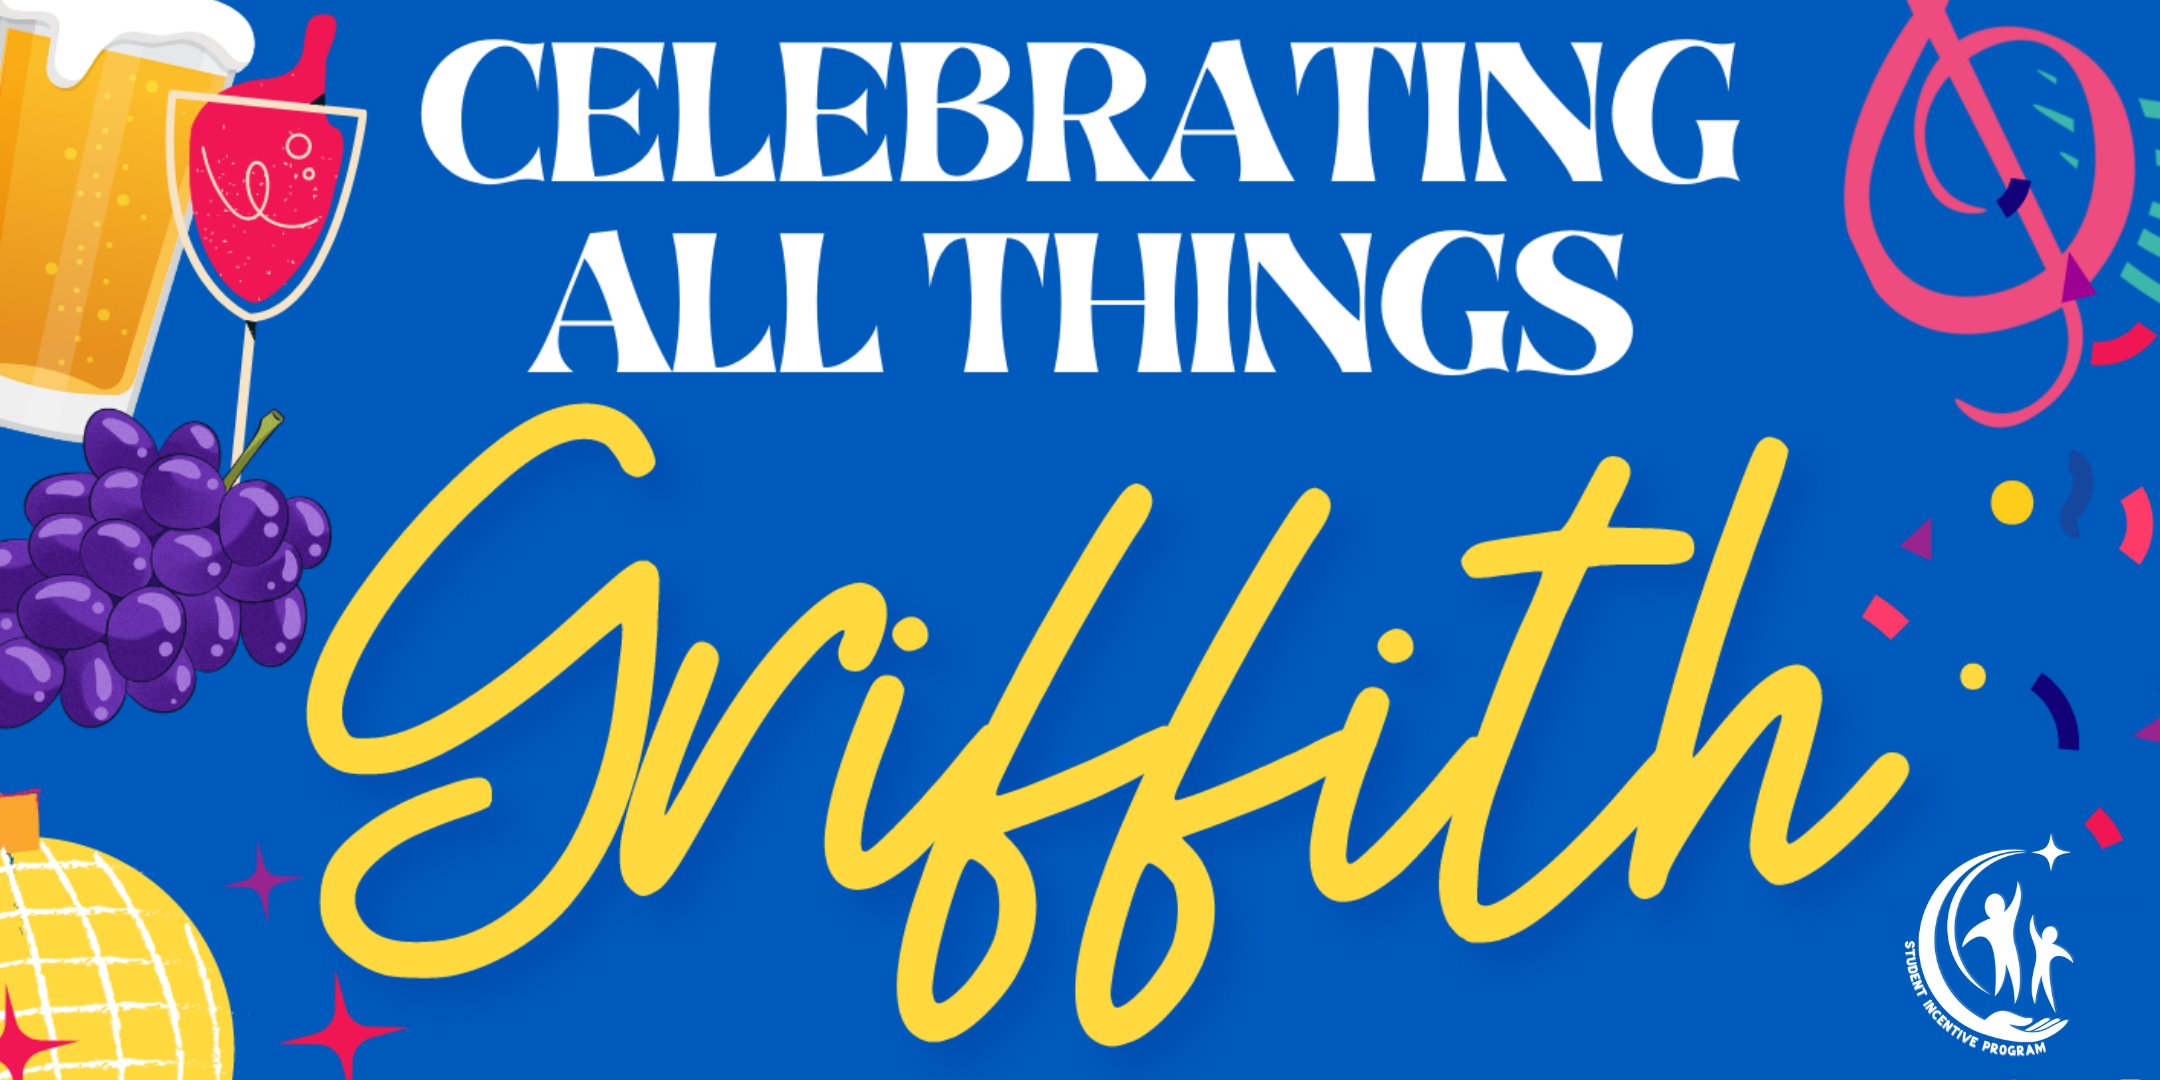 POSTPONED - Celebrating All Things Griffith